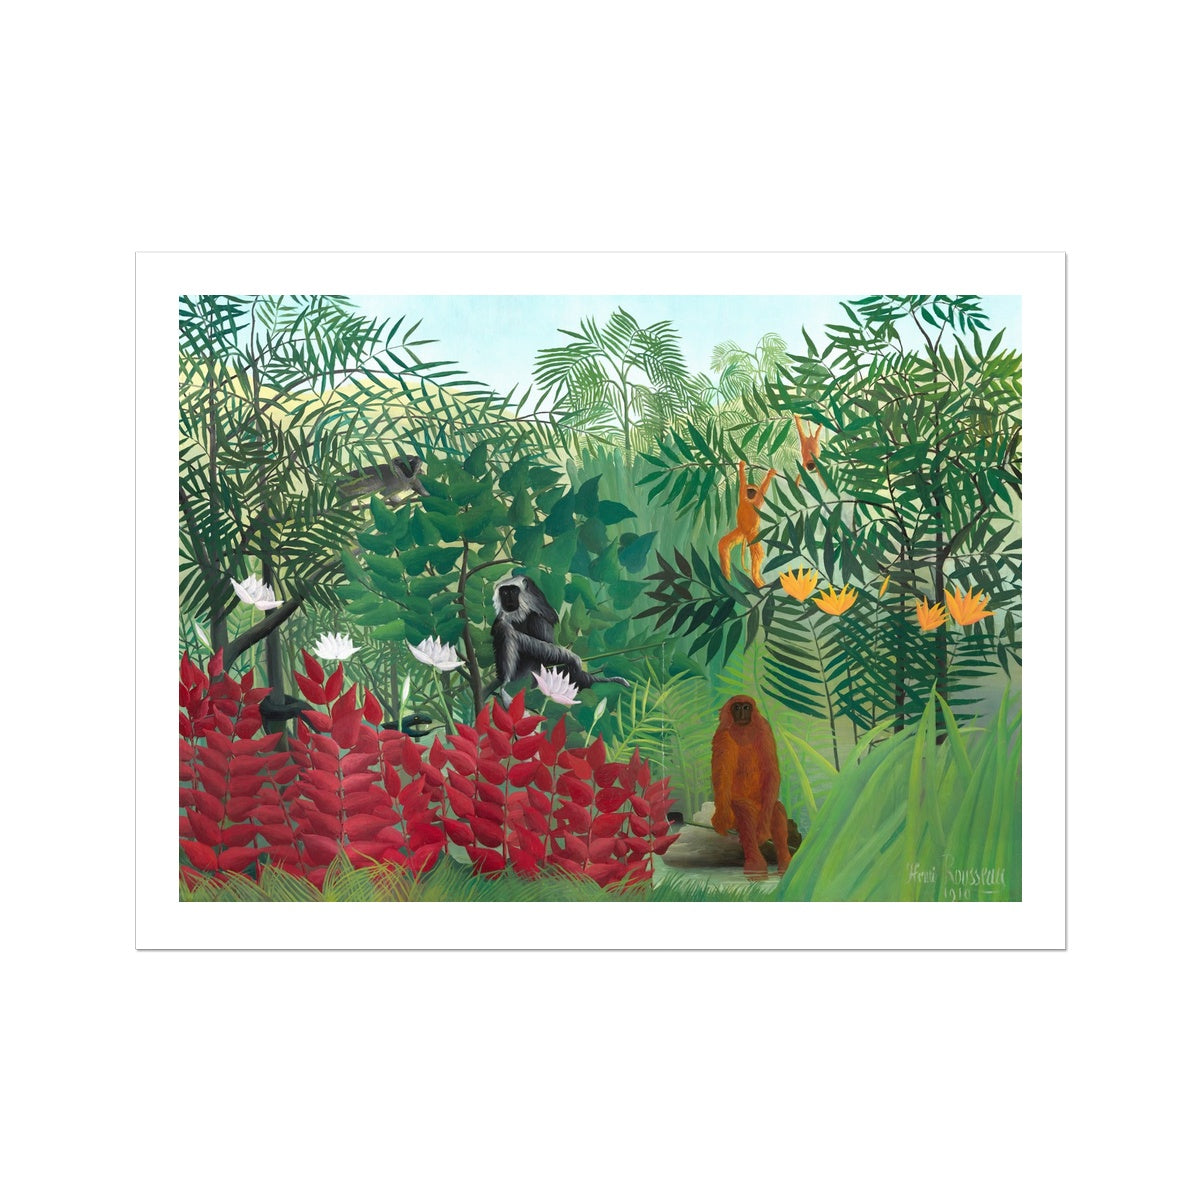 &#39;Tropical Forest with Monkeys&#39; by Henri Rousseau. Open Edition Fine Art Print. Historic Art